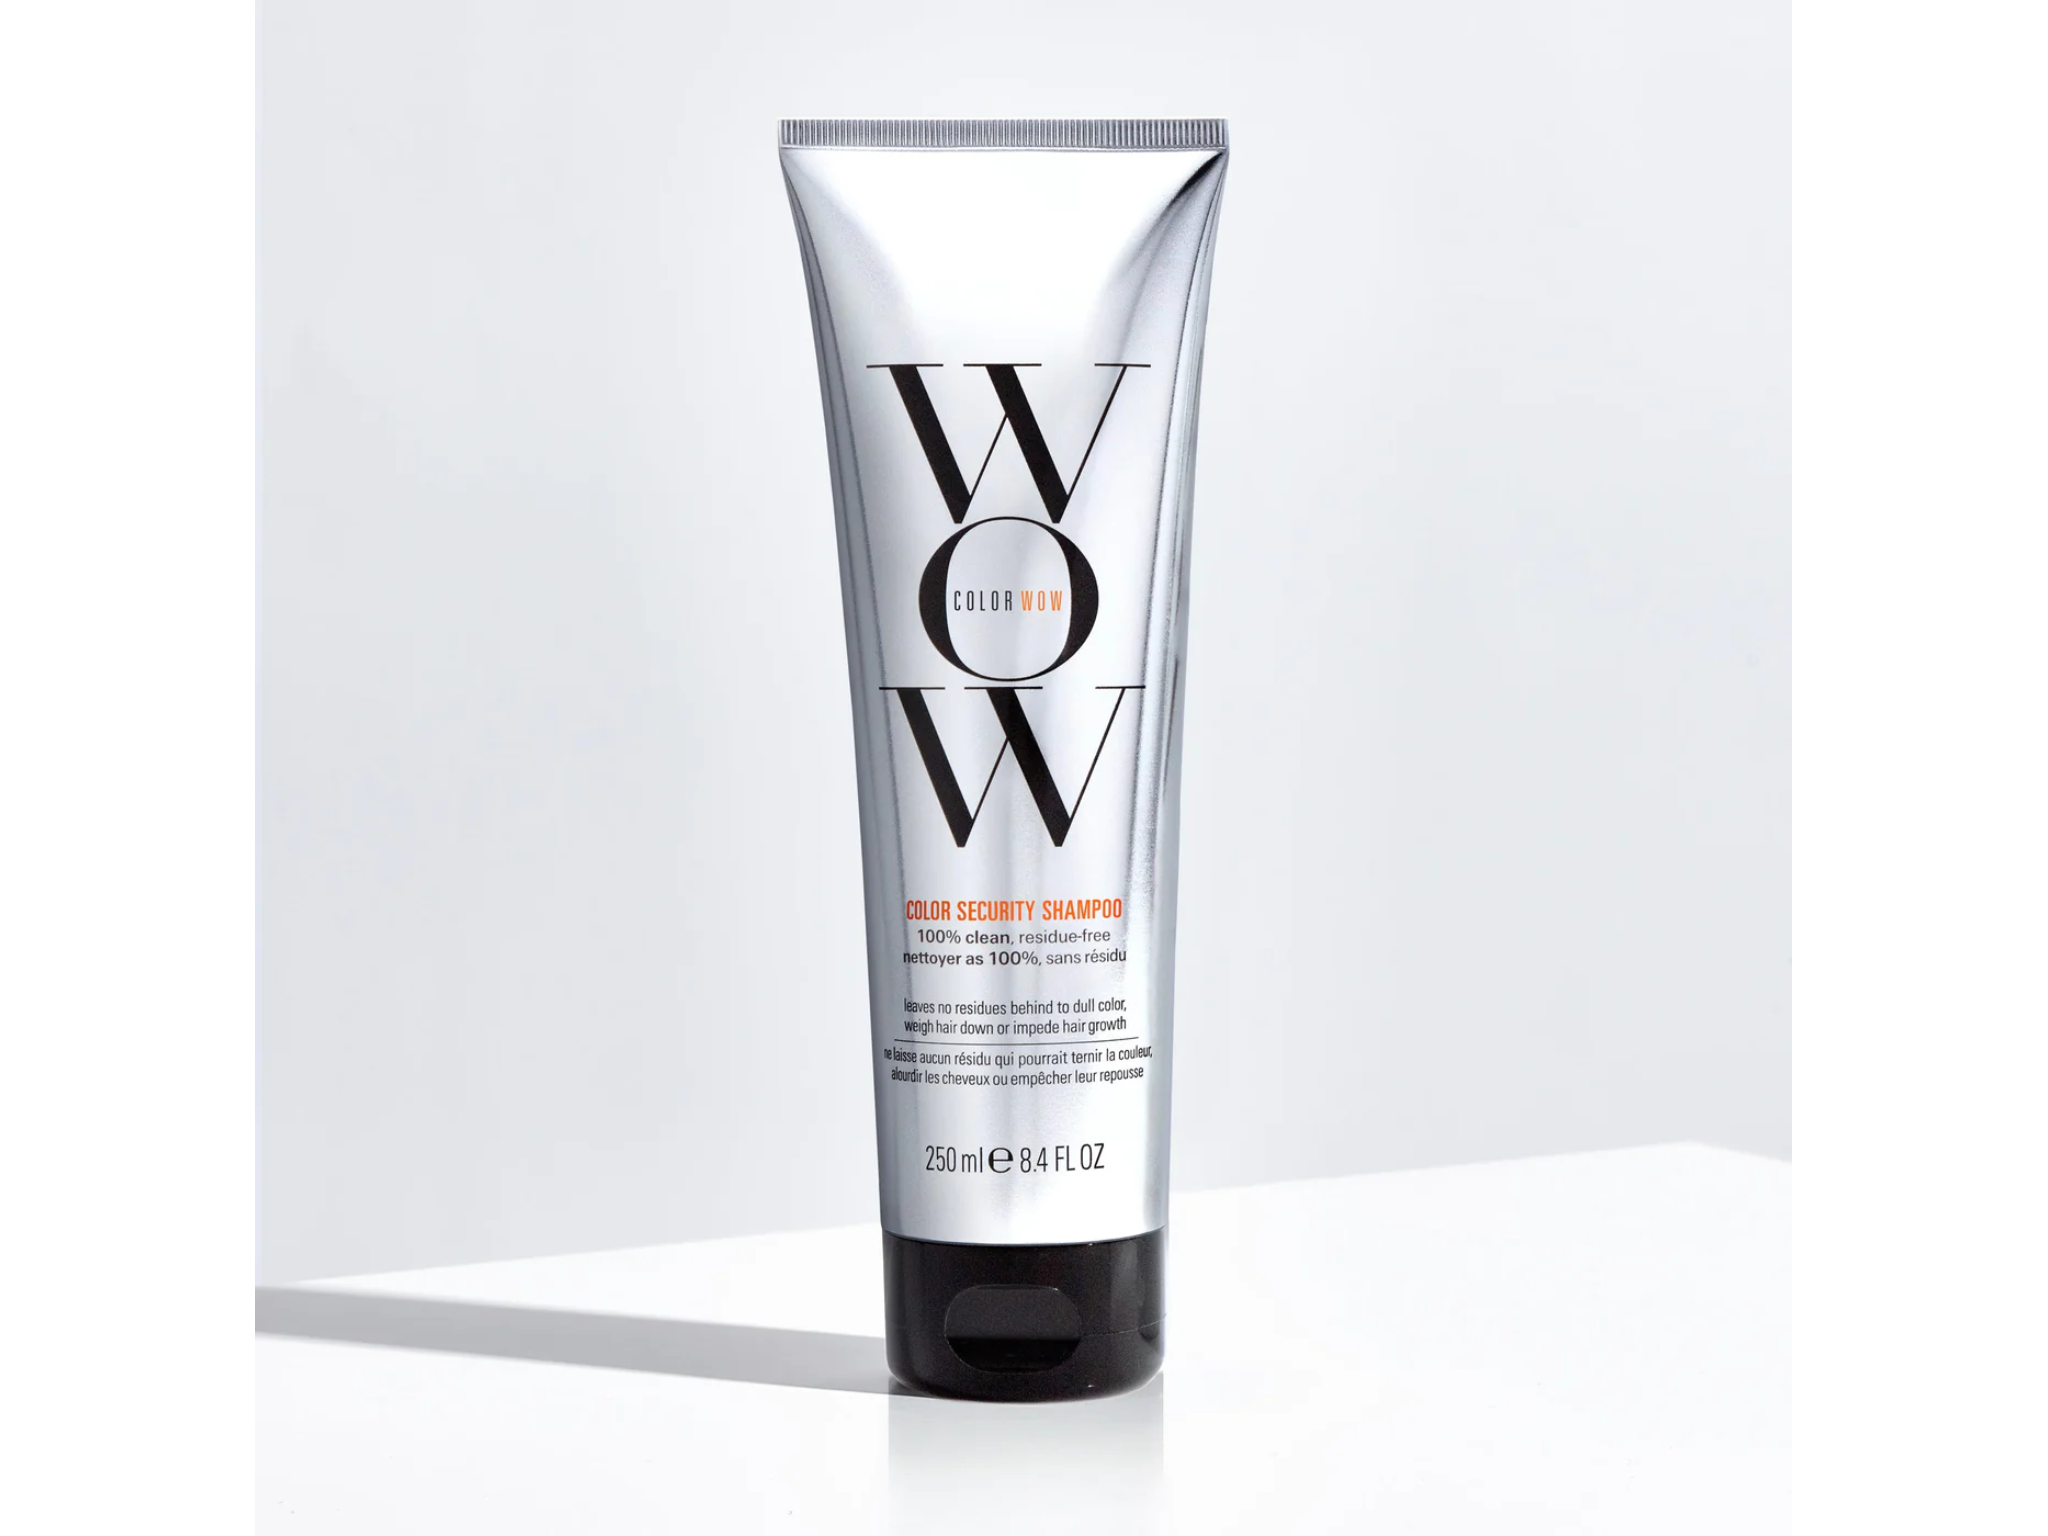 Colour wow-shampoo-indybest